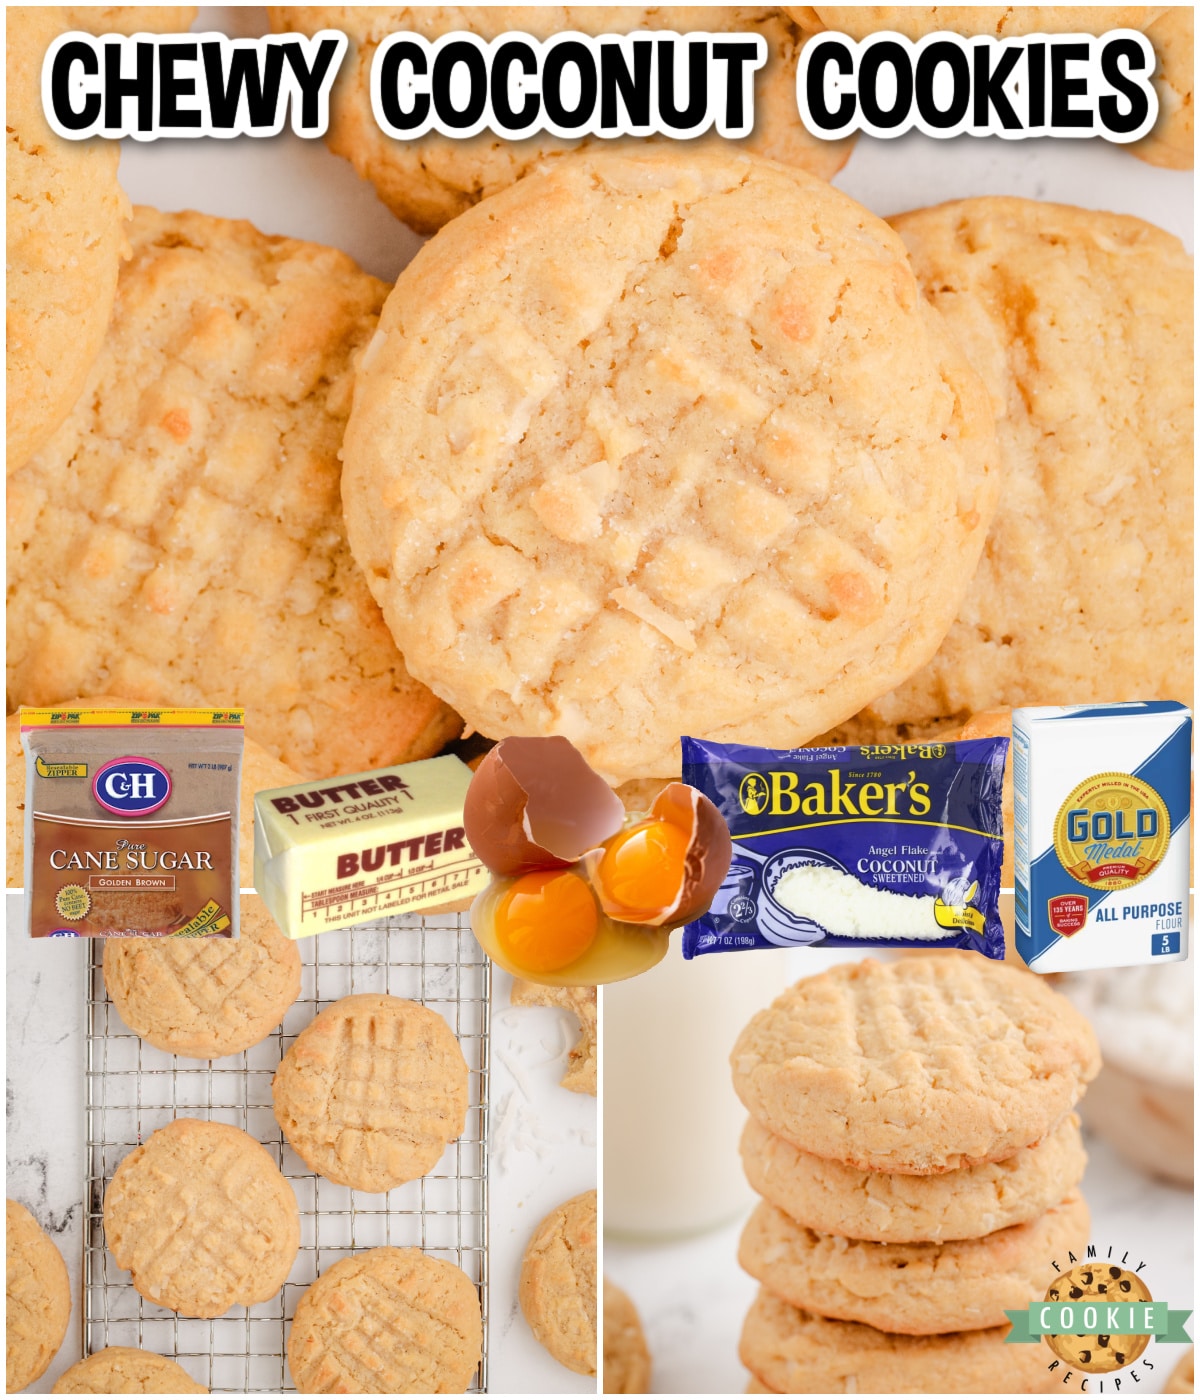 Chewy Coconut Cookies are delightful sugar cookies baked with coconut for fantastic buttery, nutty flavor!